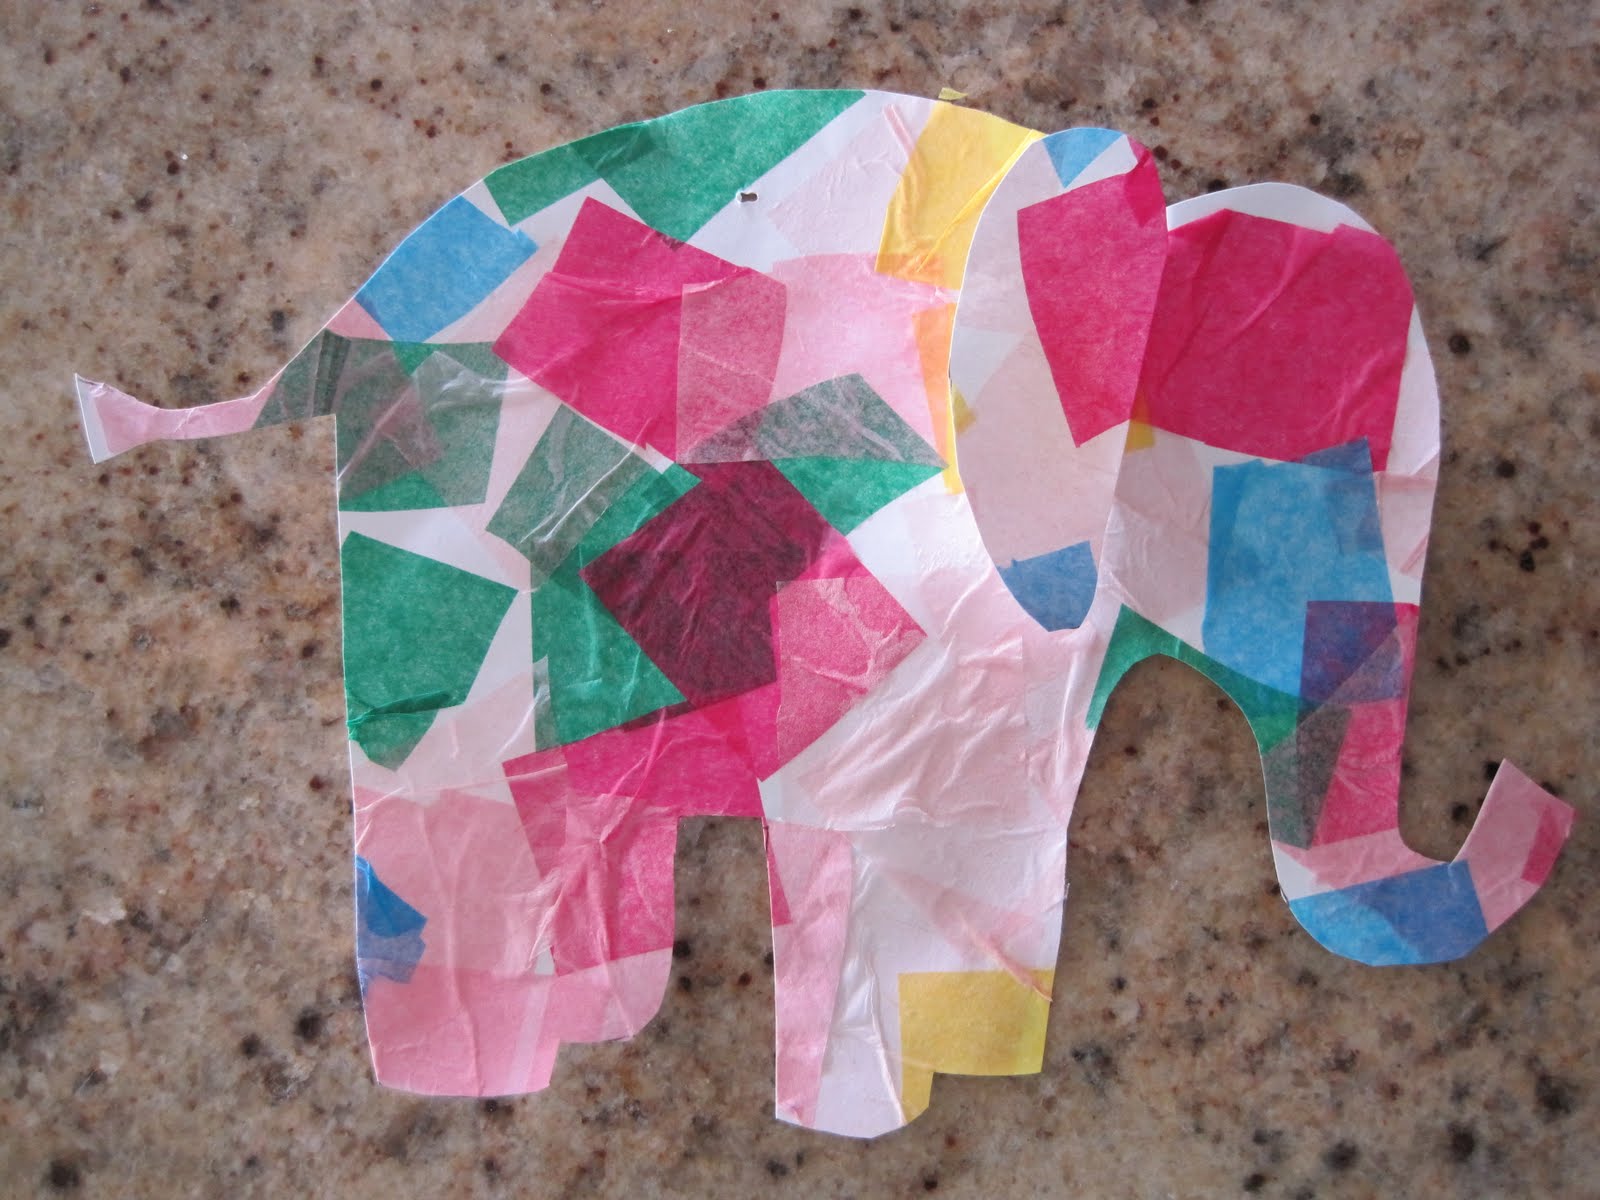 The Many Layers of Me: Simple Tissue Paper crafts